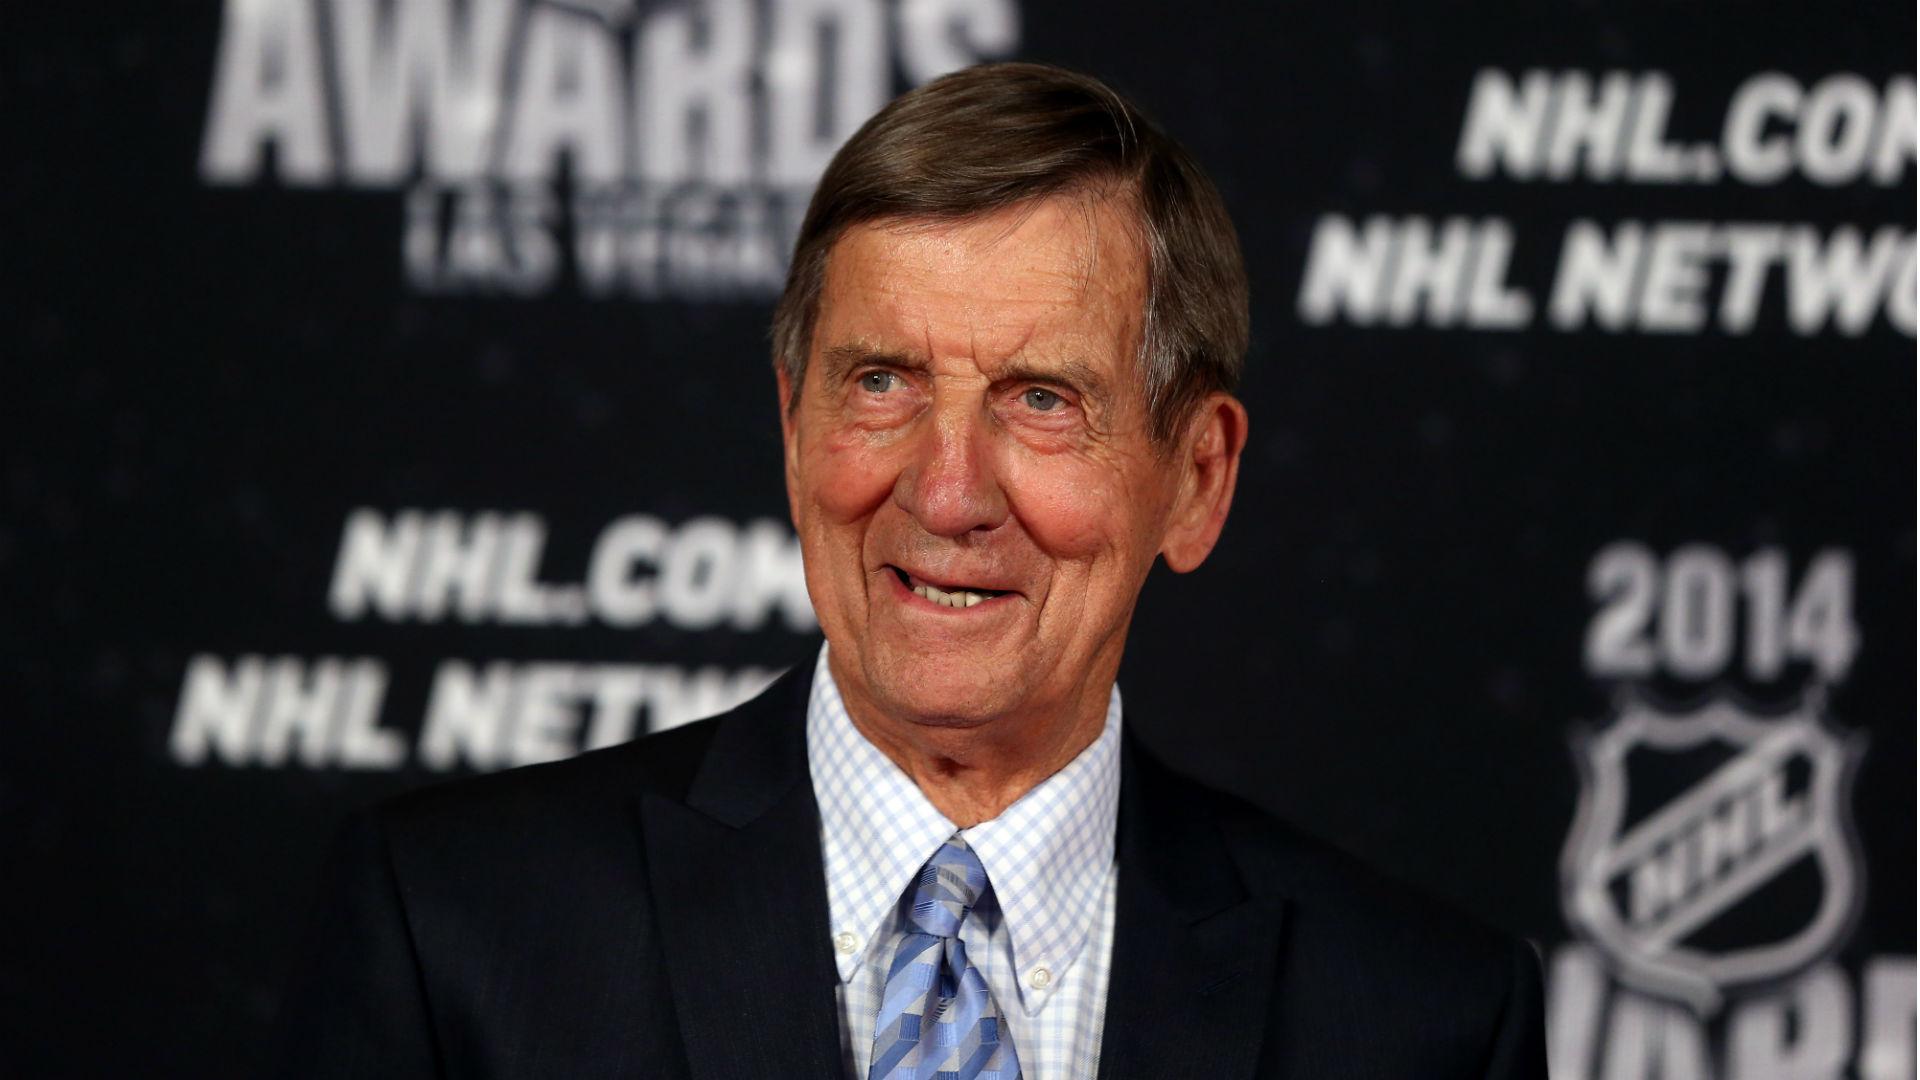 Hockey world reacts to passing of Hall of Fame, Red Wings legend Ted